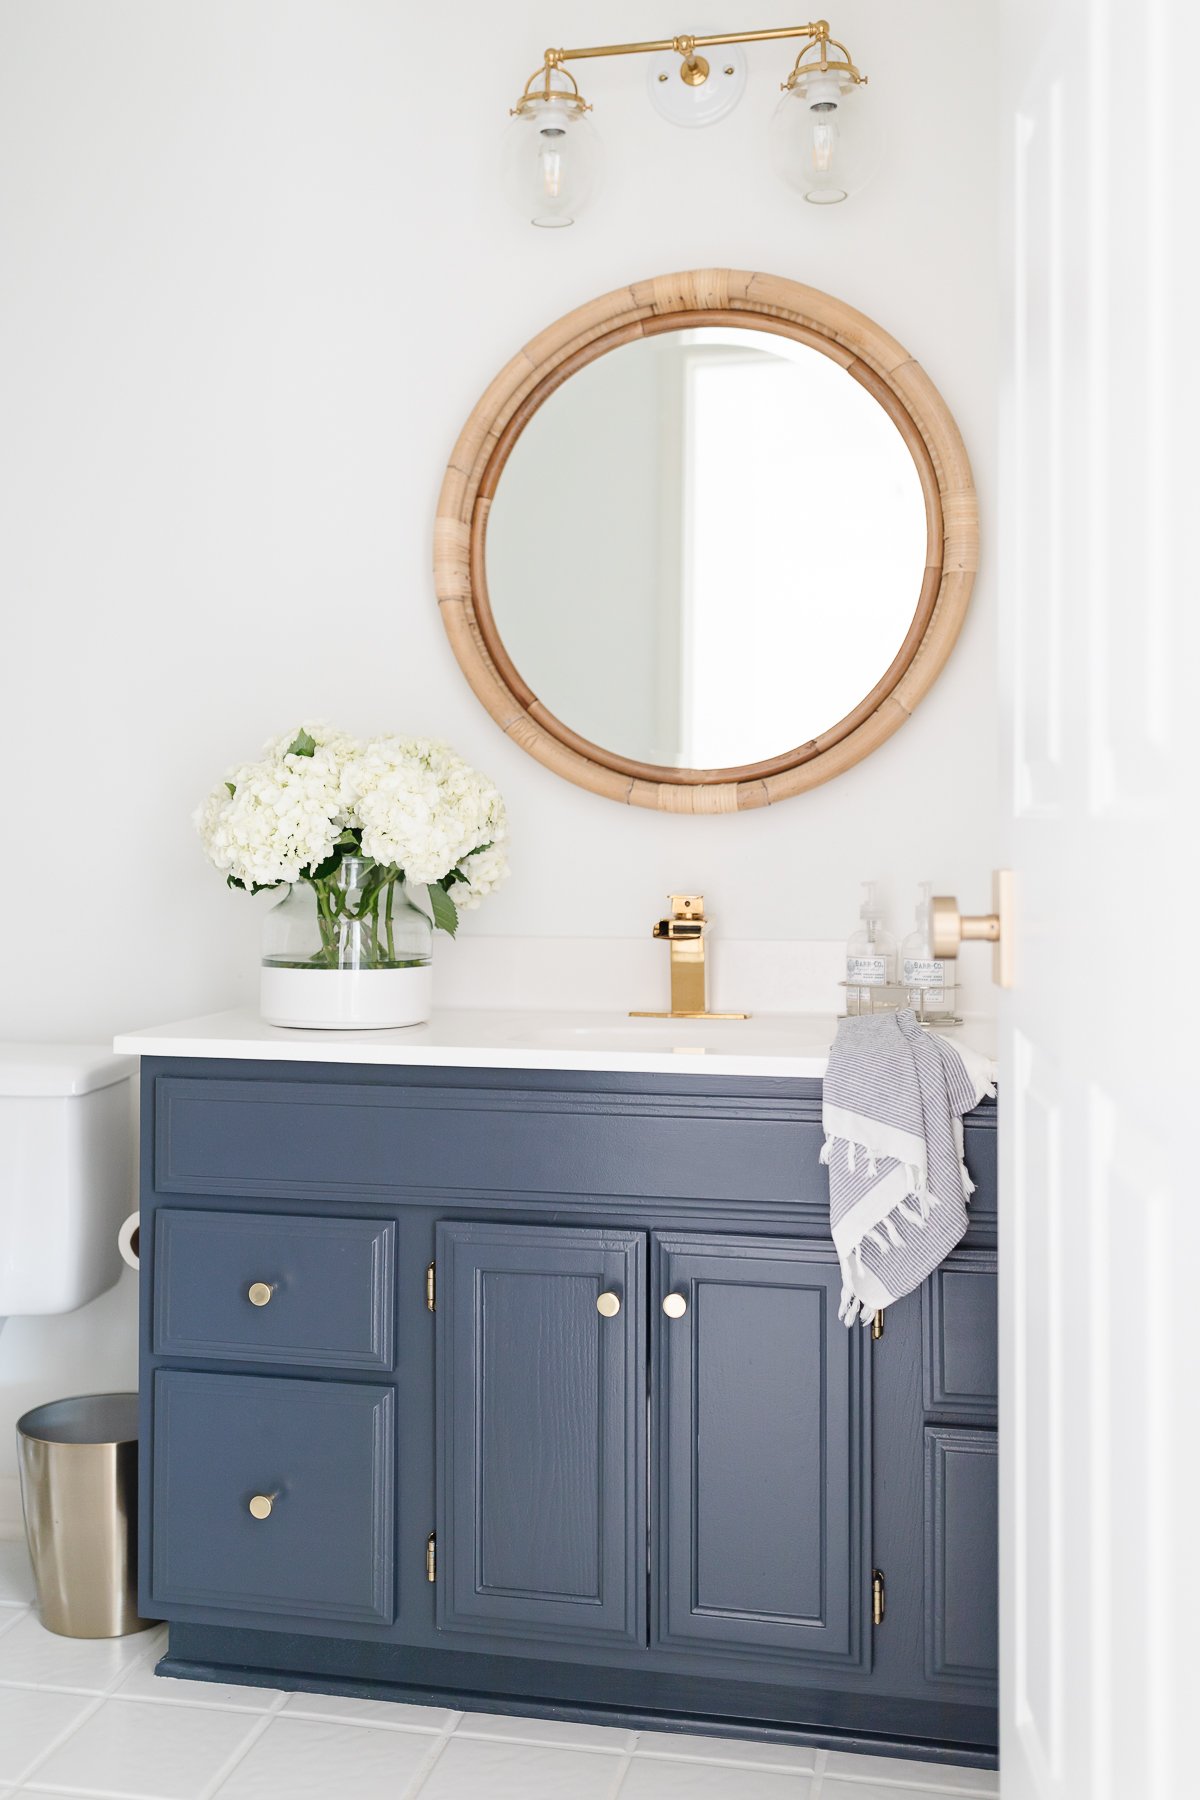 blue vanity rattan mirror double sconce and flowers in bath